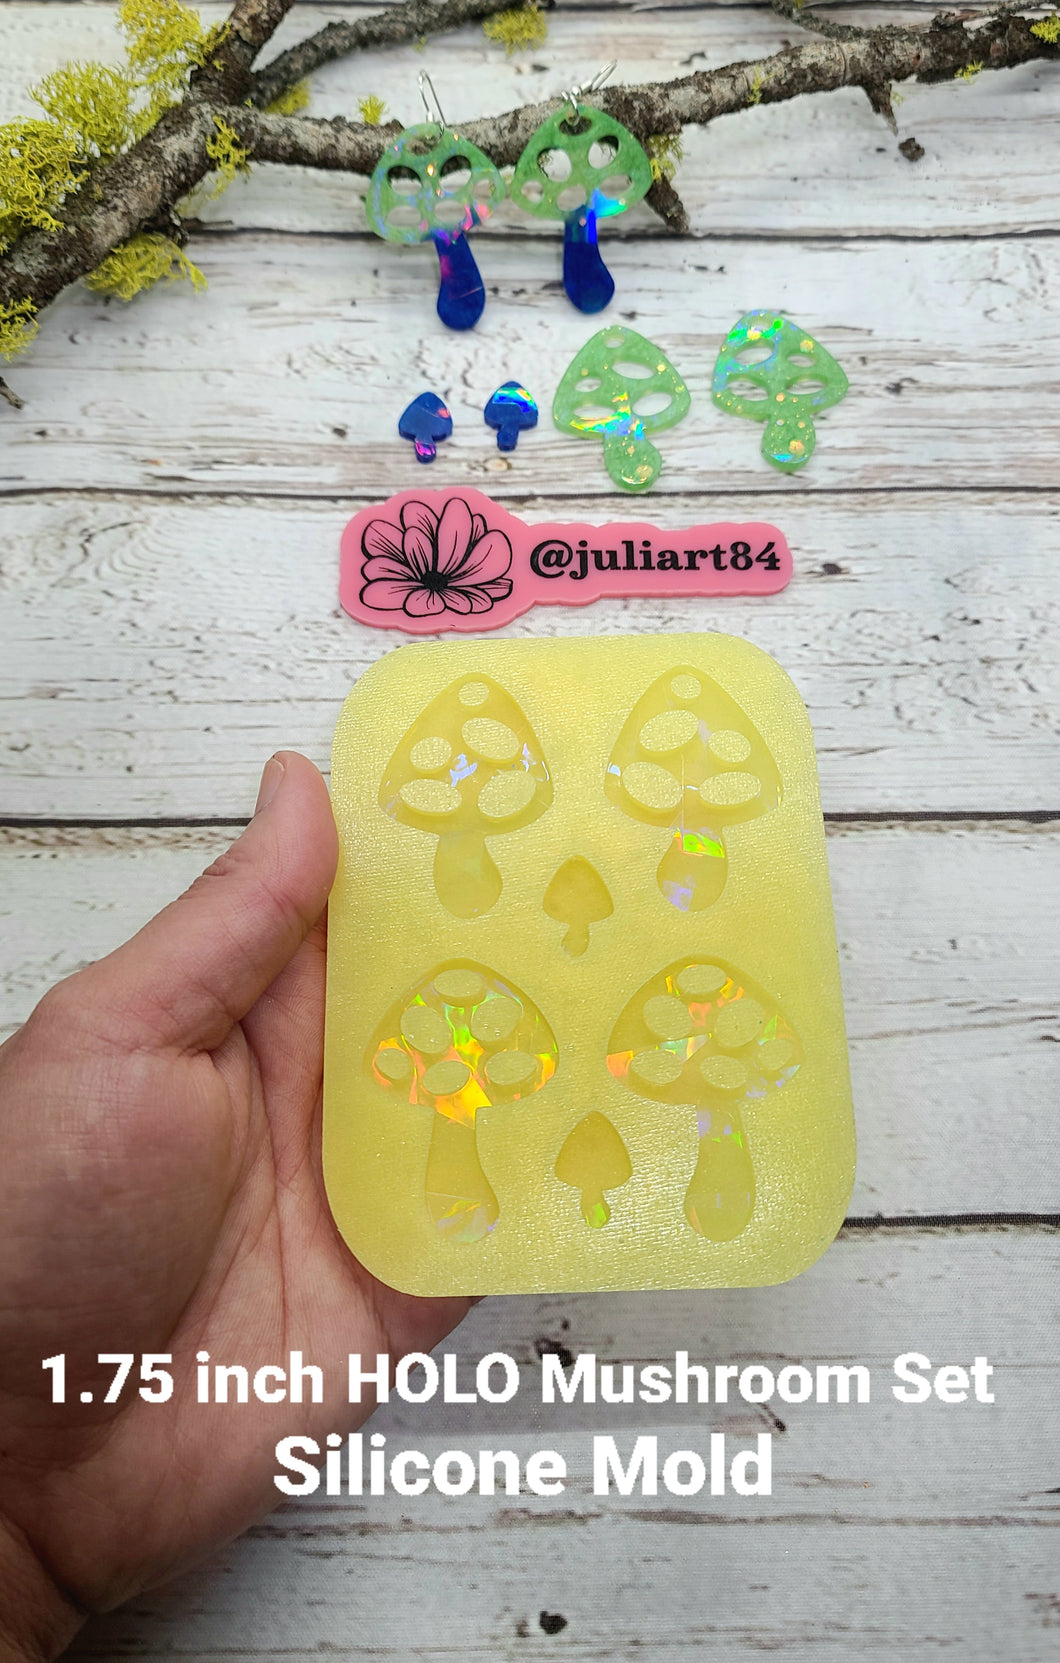 1.75 inch HOLO Mushroom Set Silicone Mold for Resin